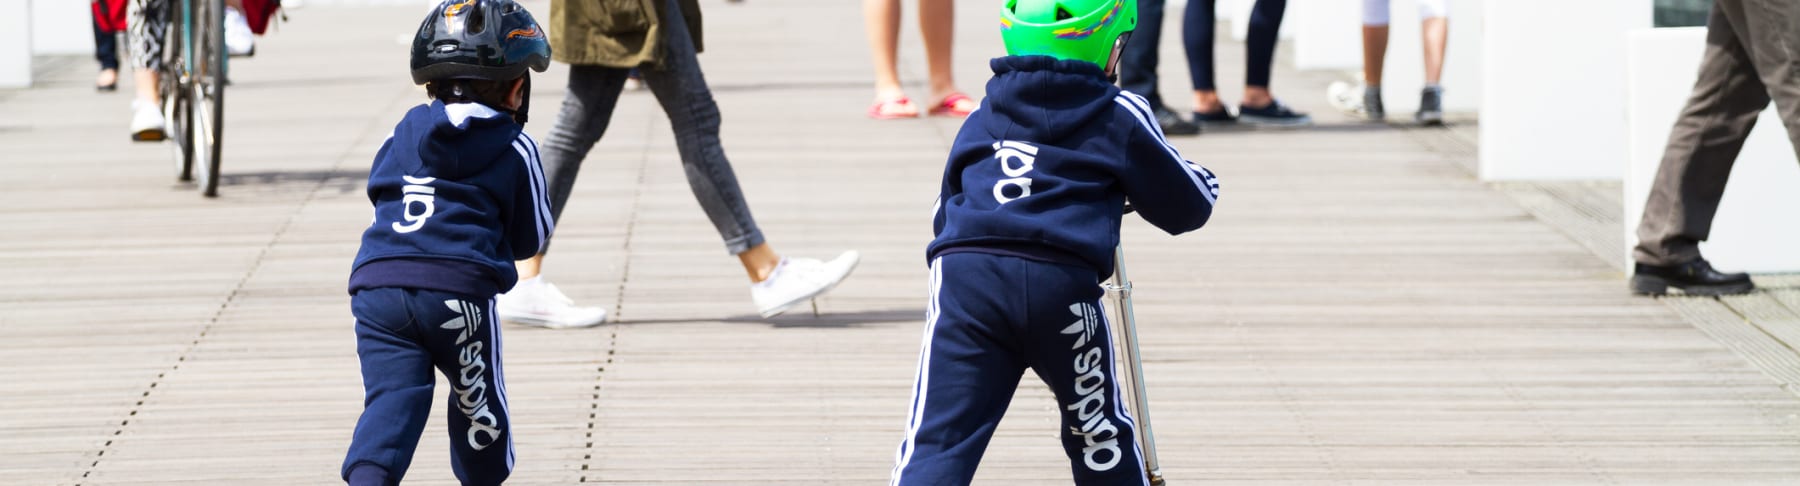 kids wear adidas while riding scooters